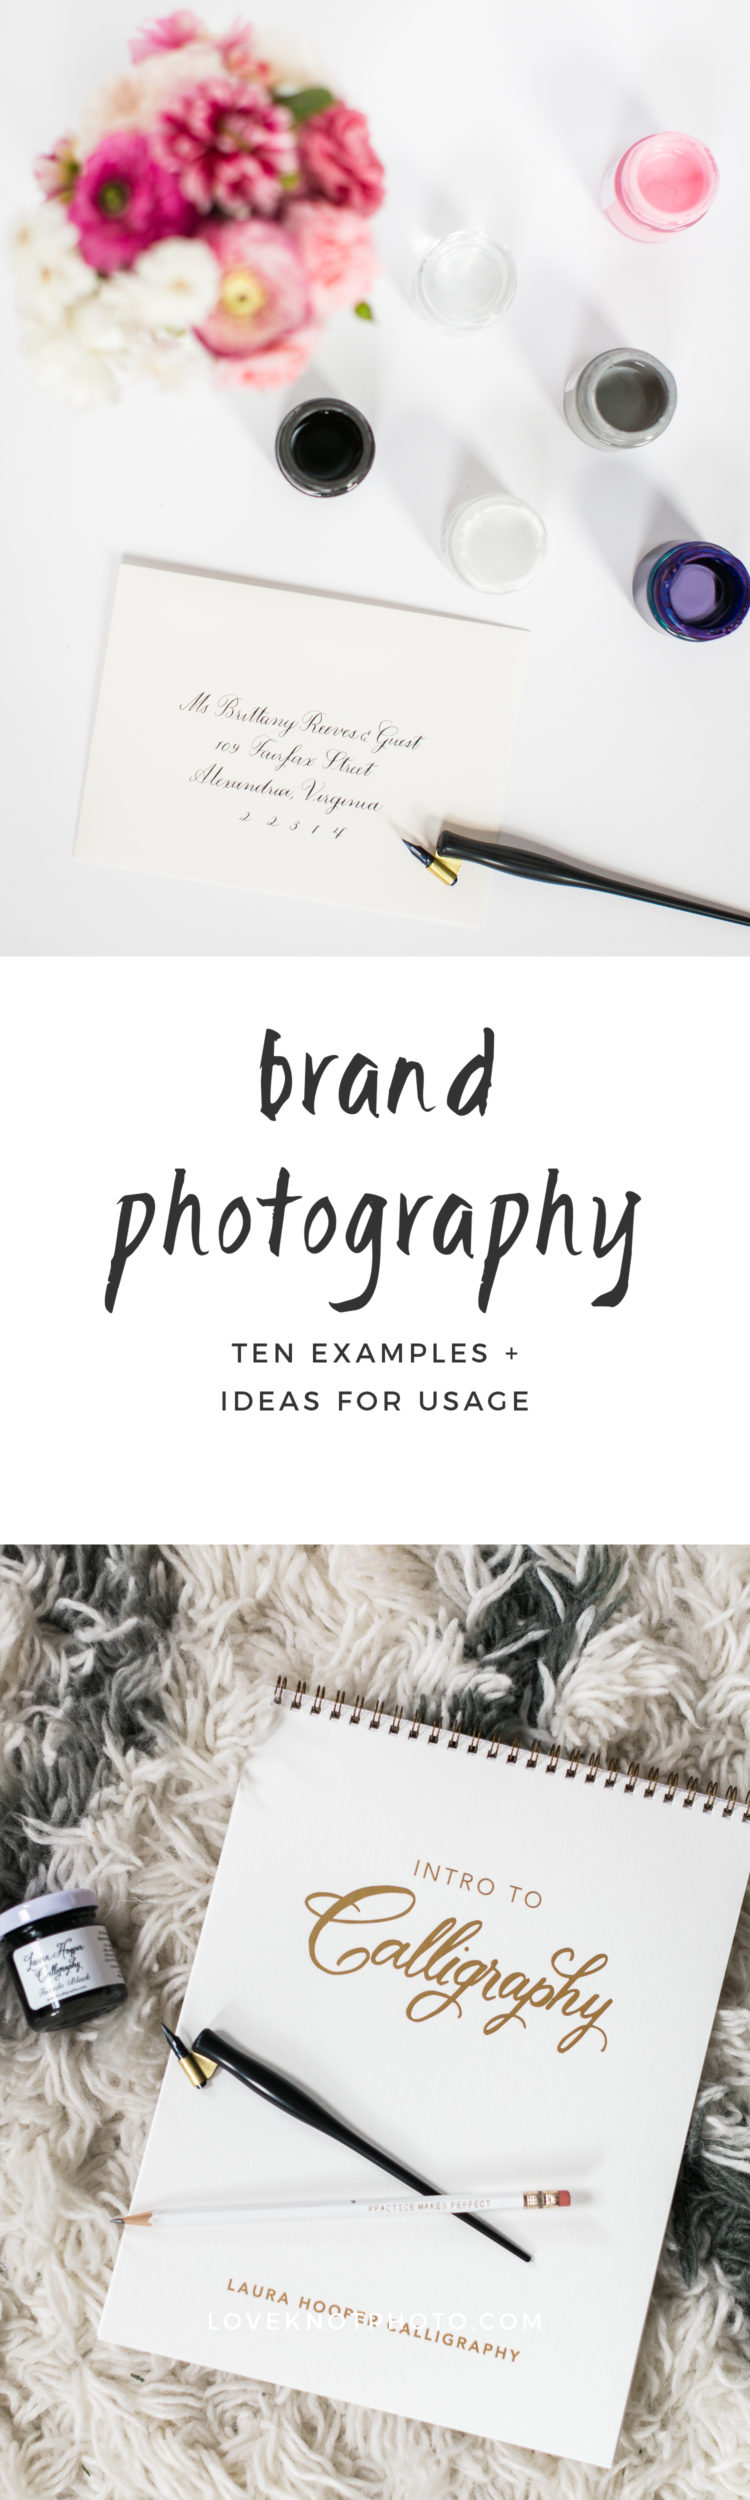 brand photography pinterest what is it how will it benefit my business headshots blog photos